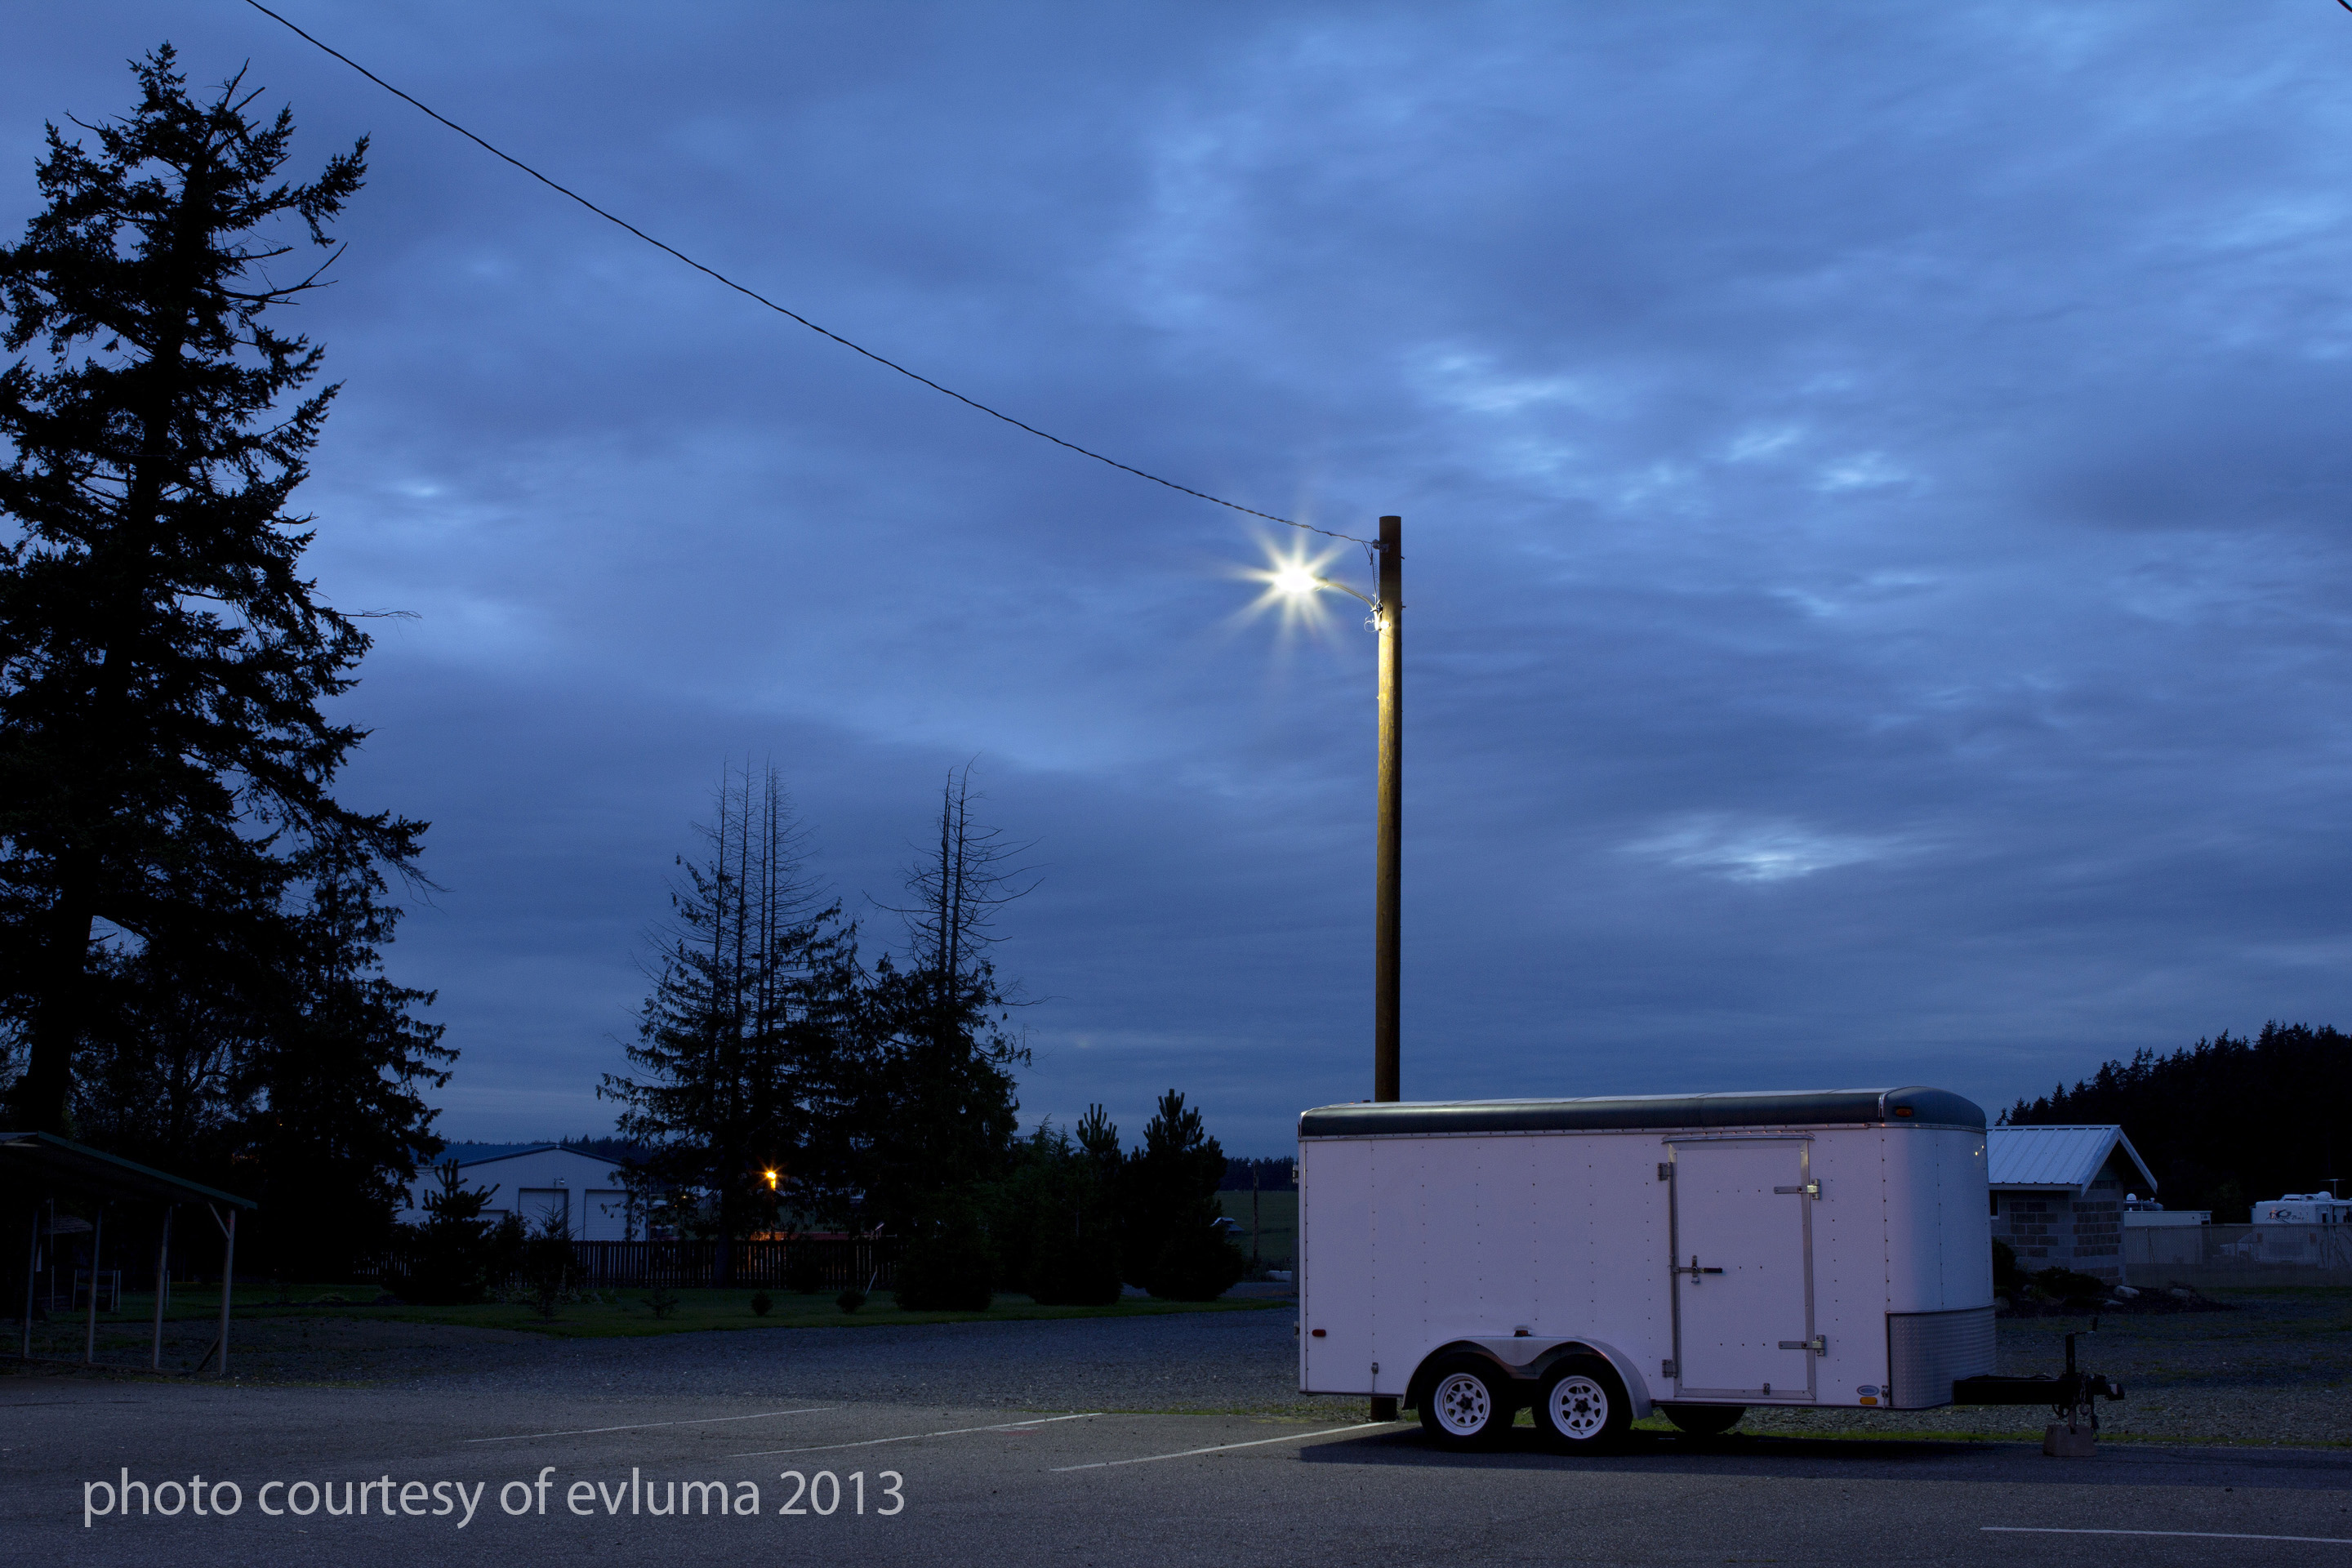 Camano Island, WA has Dark Sky Requirements for Outdoor Lighting. Flat Lens AreaMax installed in Parking Lot.